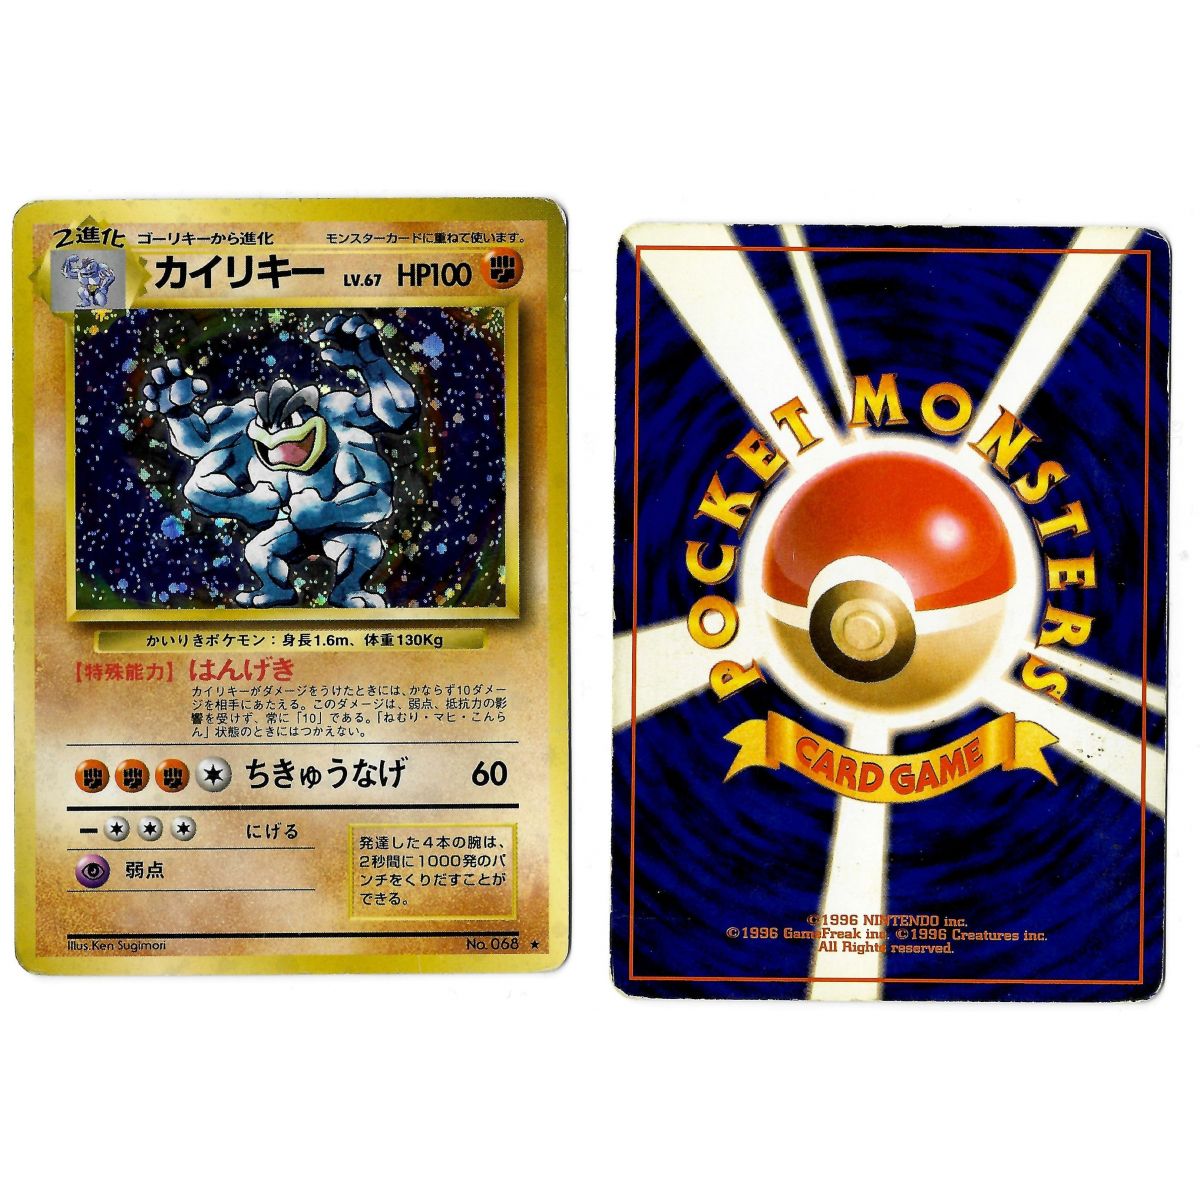 Machamp (5) No.068 Expansion Pack BS Holo Unlimited Japanese View Scan